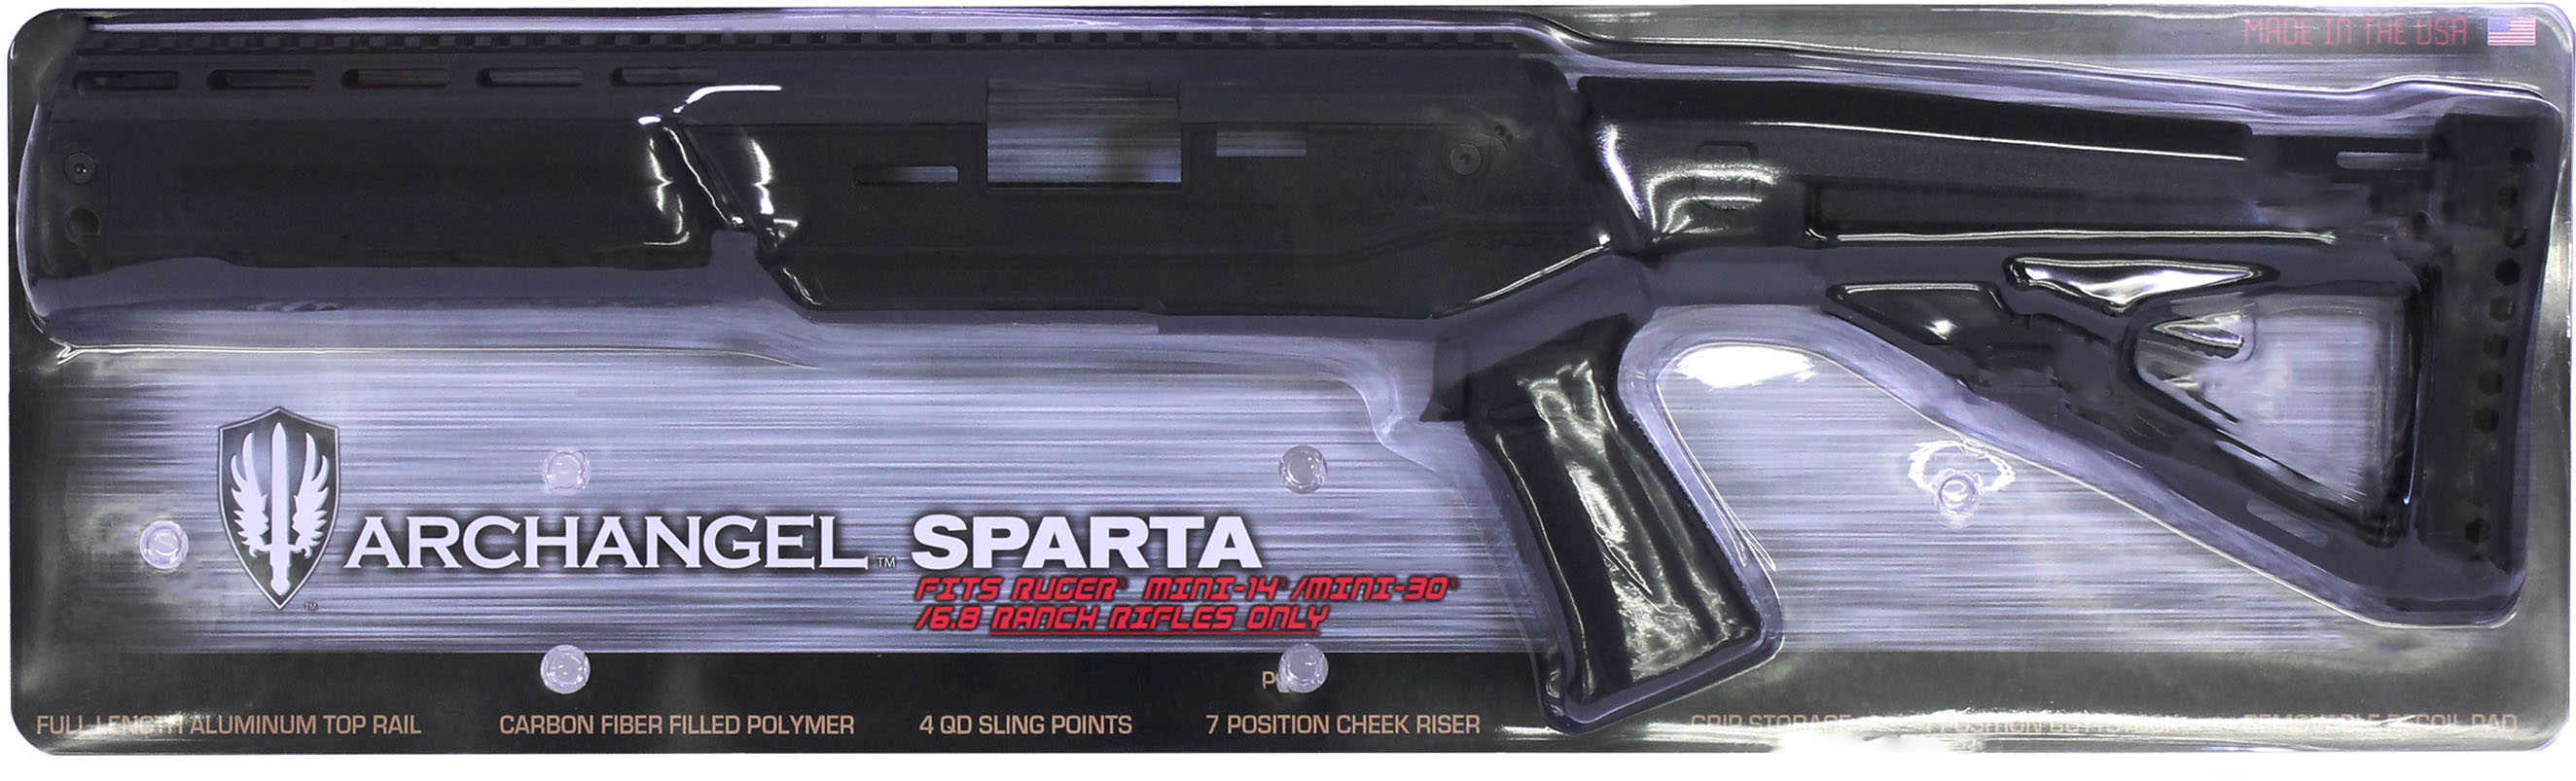 Promag Industries Sparta Pistol Grip Conversion Stock For Ruger Mini-14/30 & 6.8 Ranch